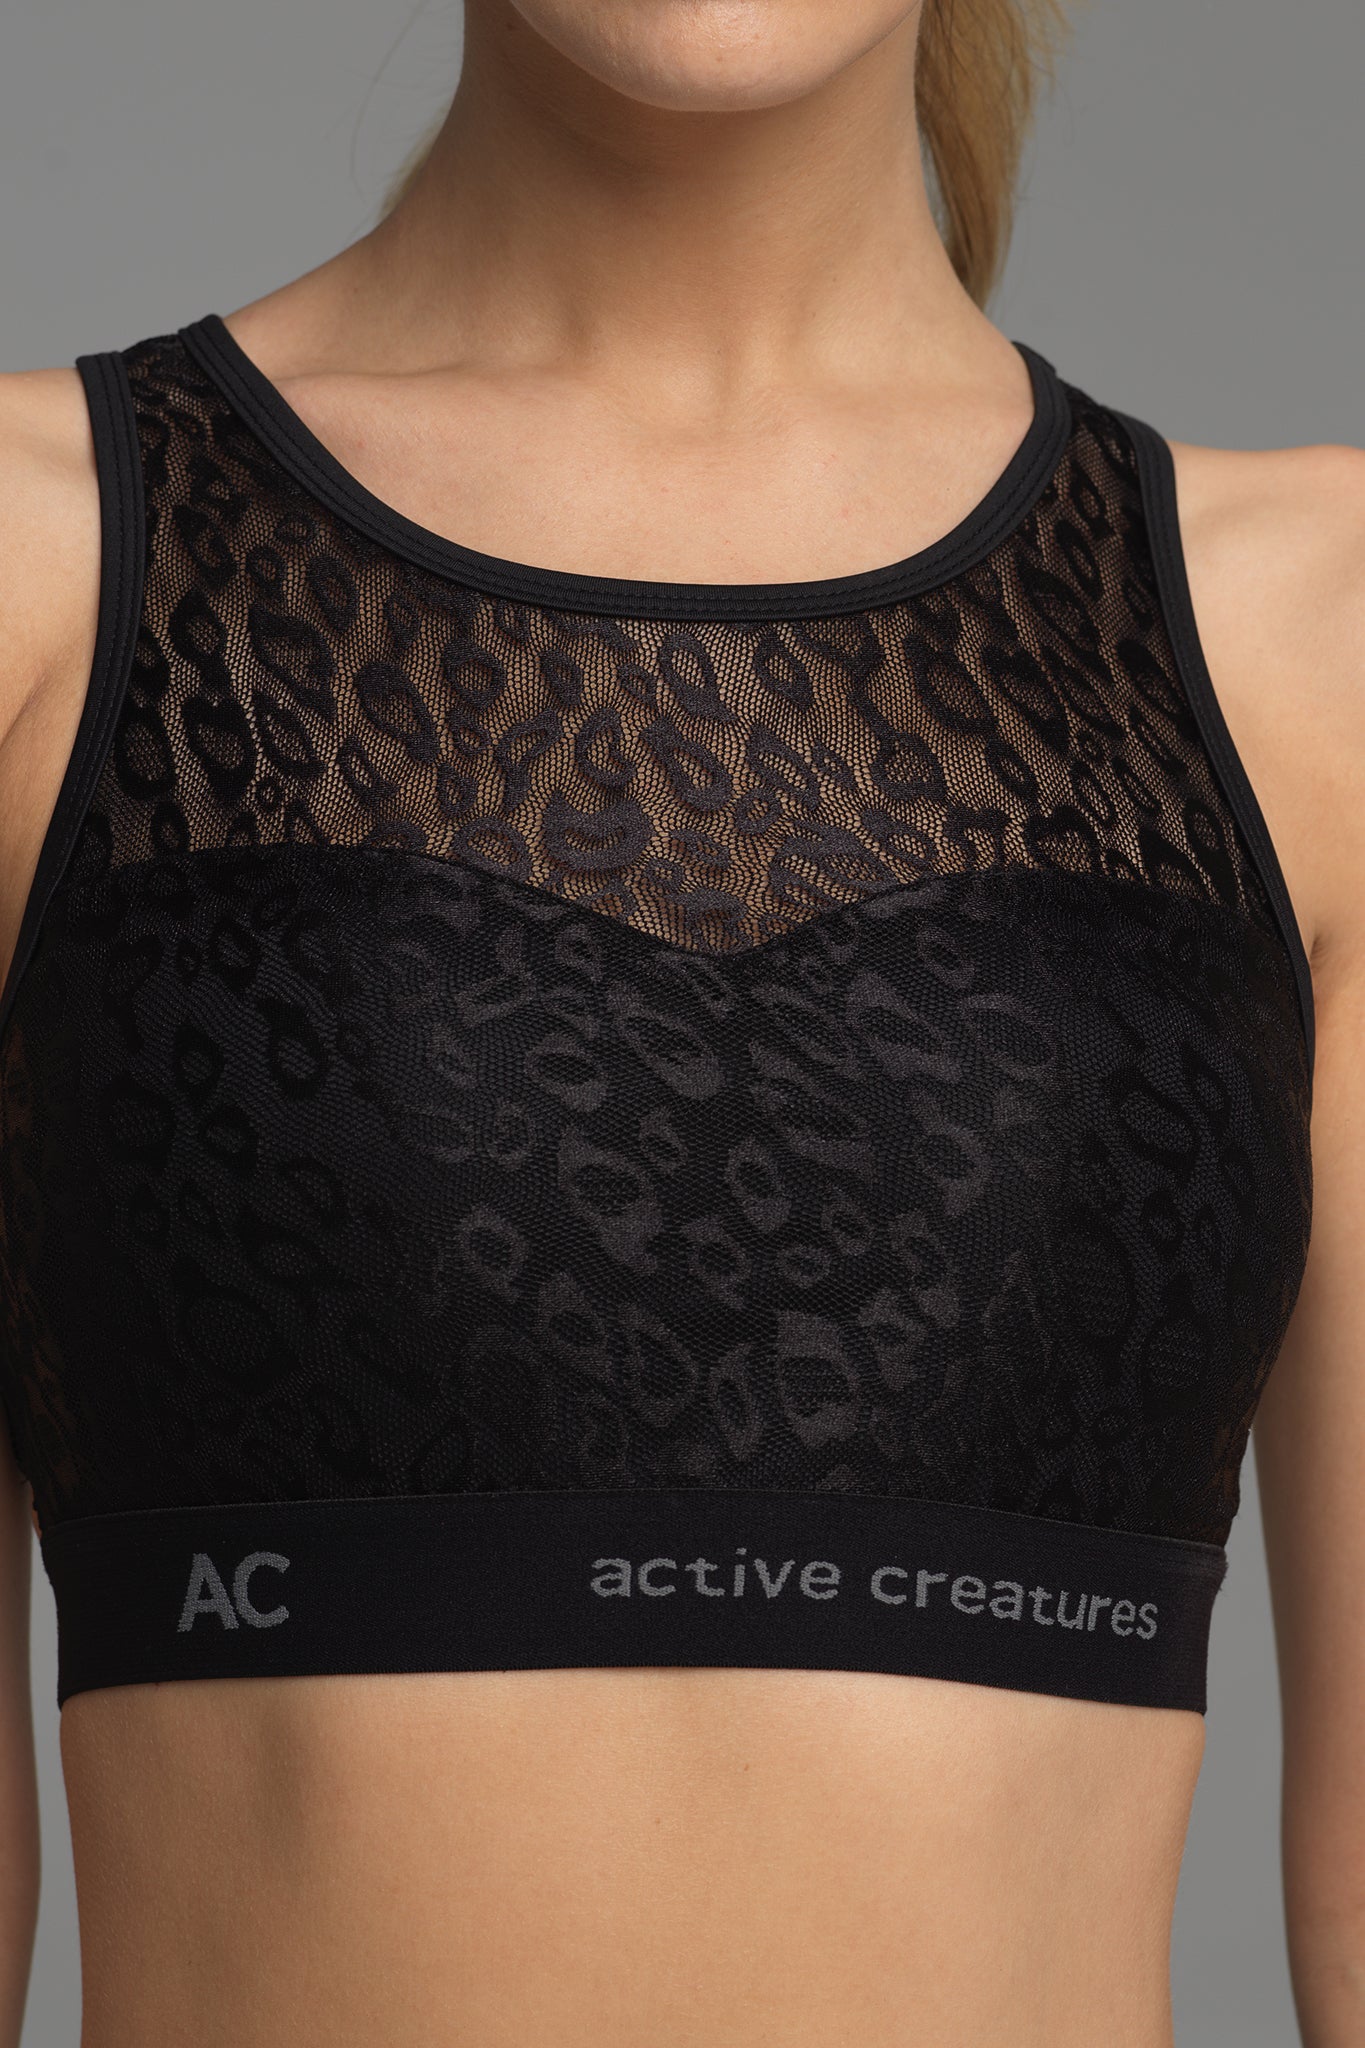 Treasure Chest sports bra in black animal print lace (front view)